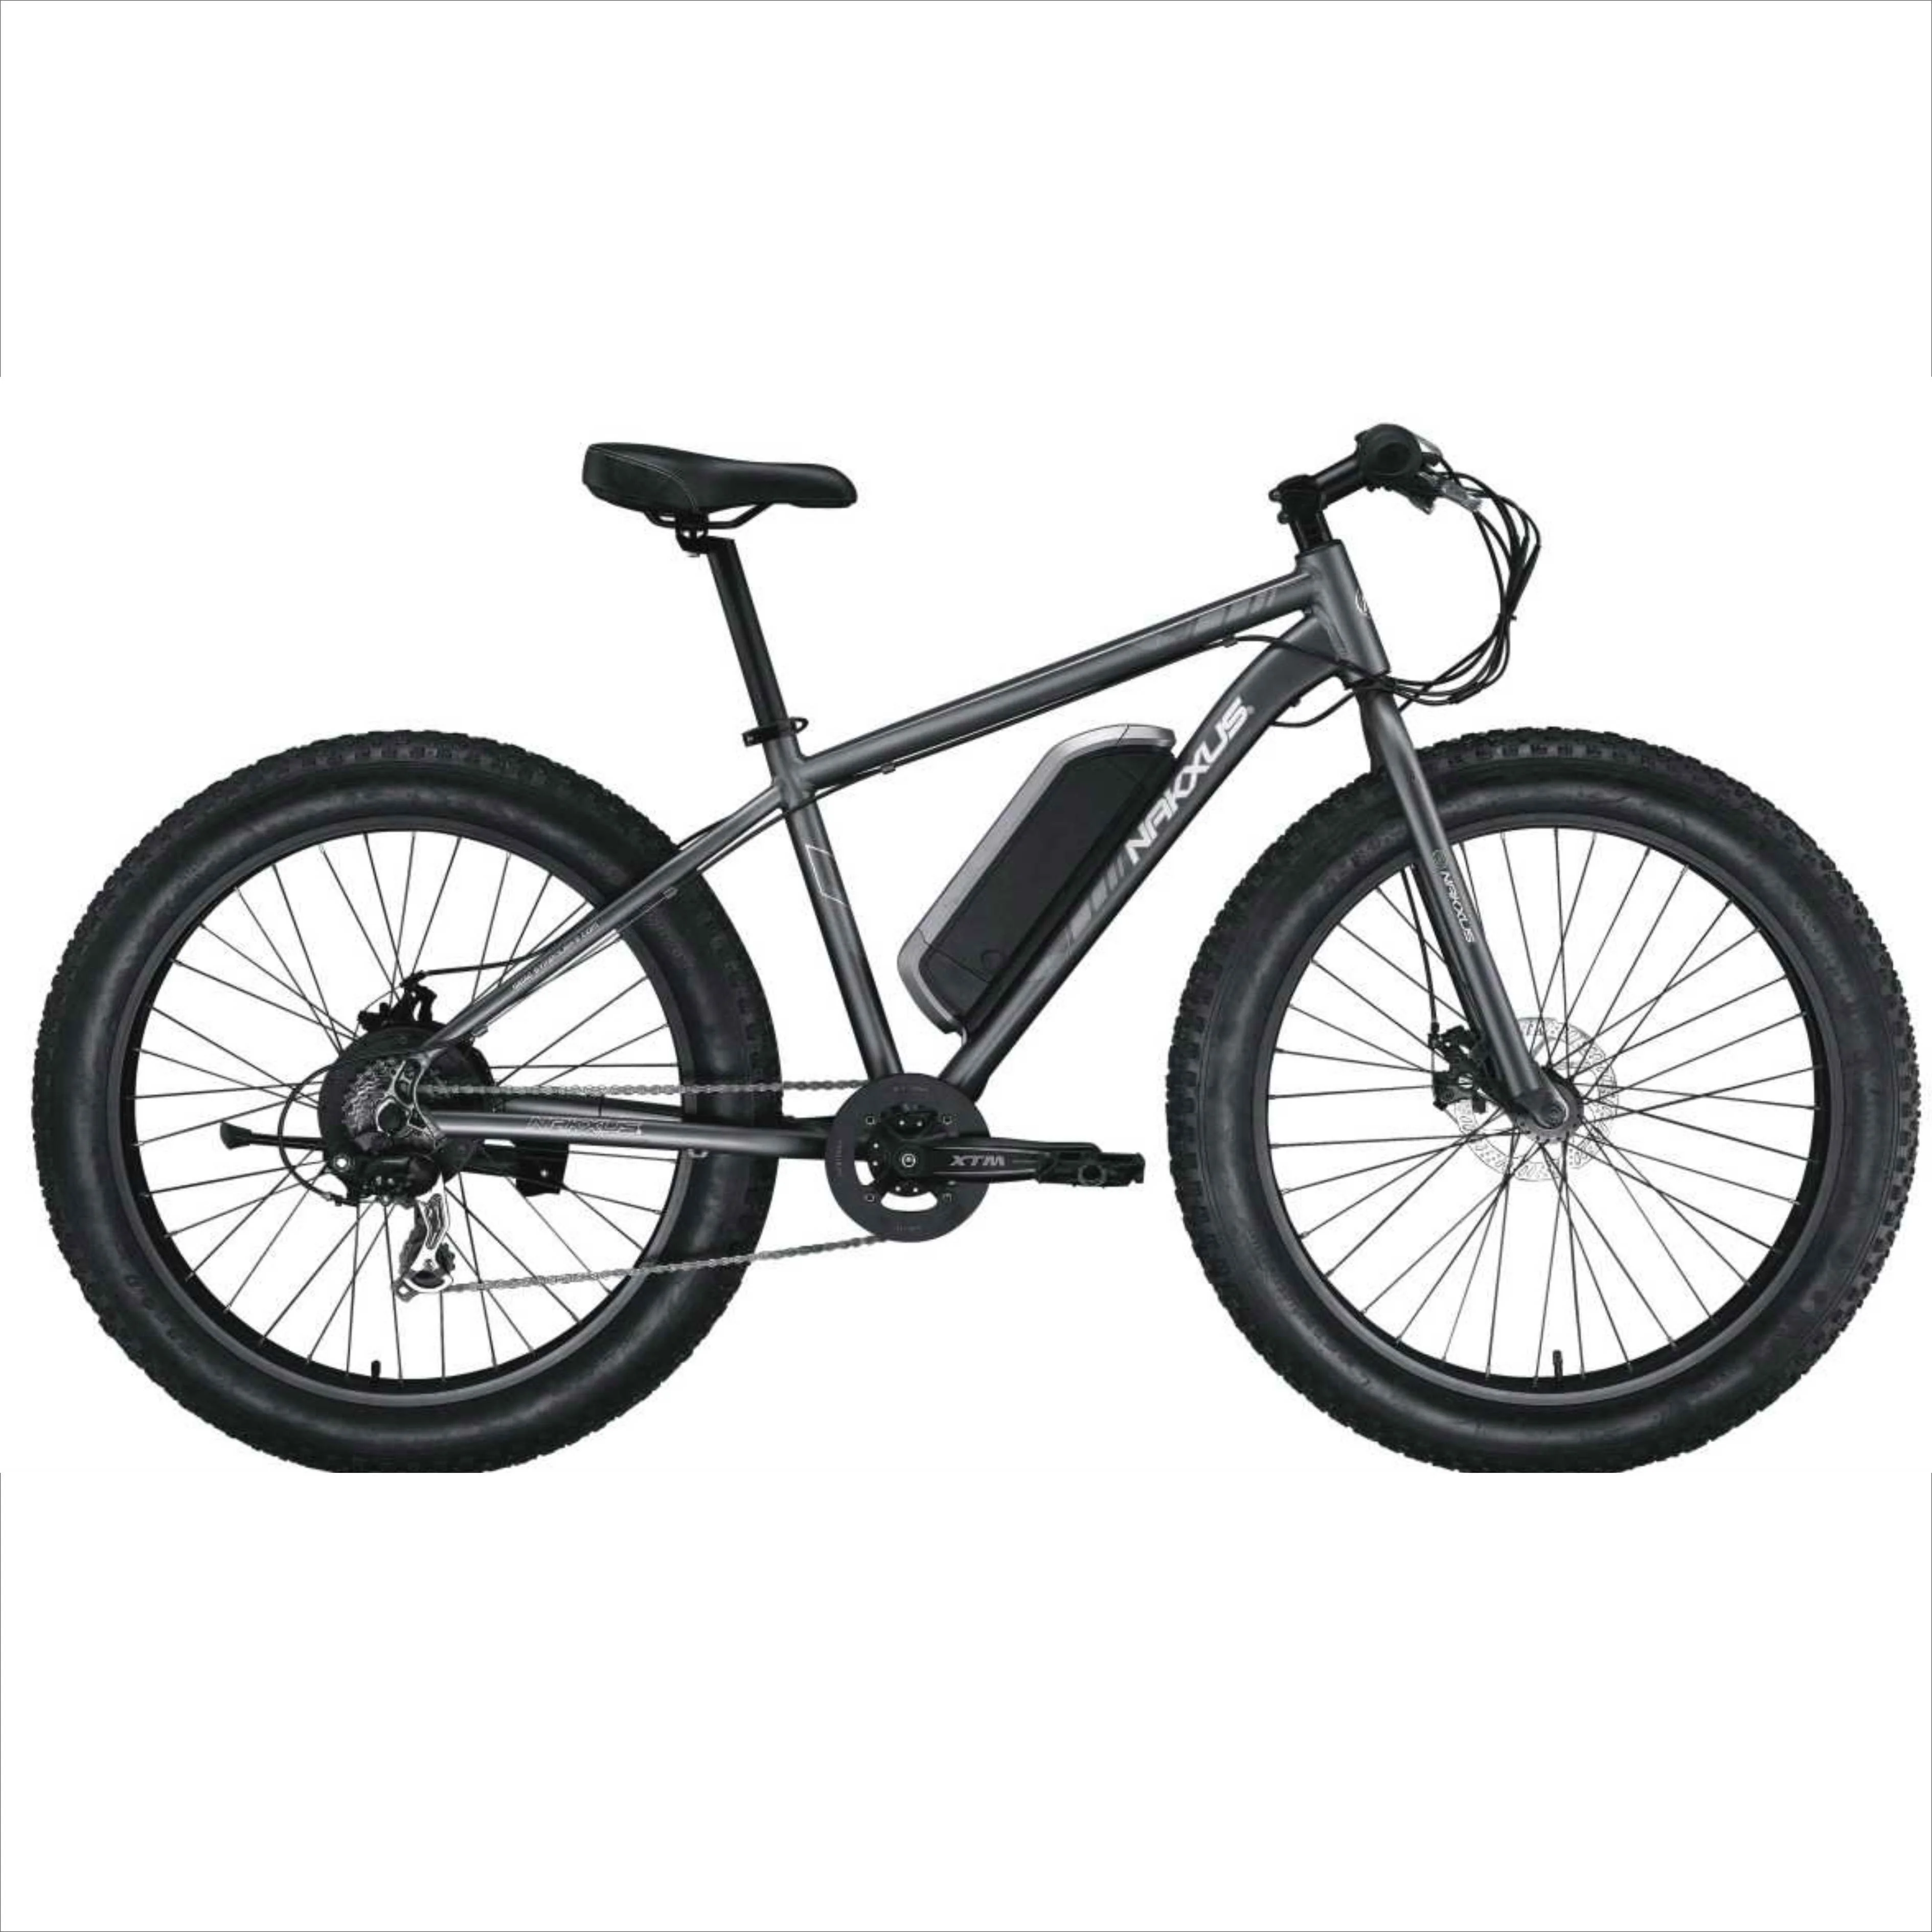 factory outlet bikes